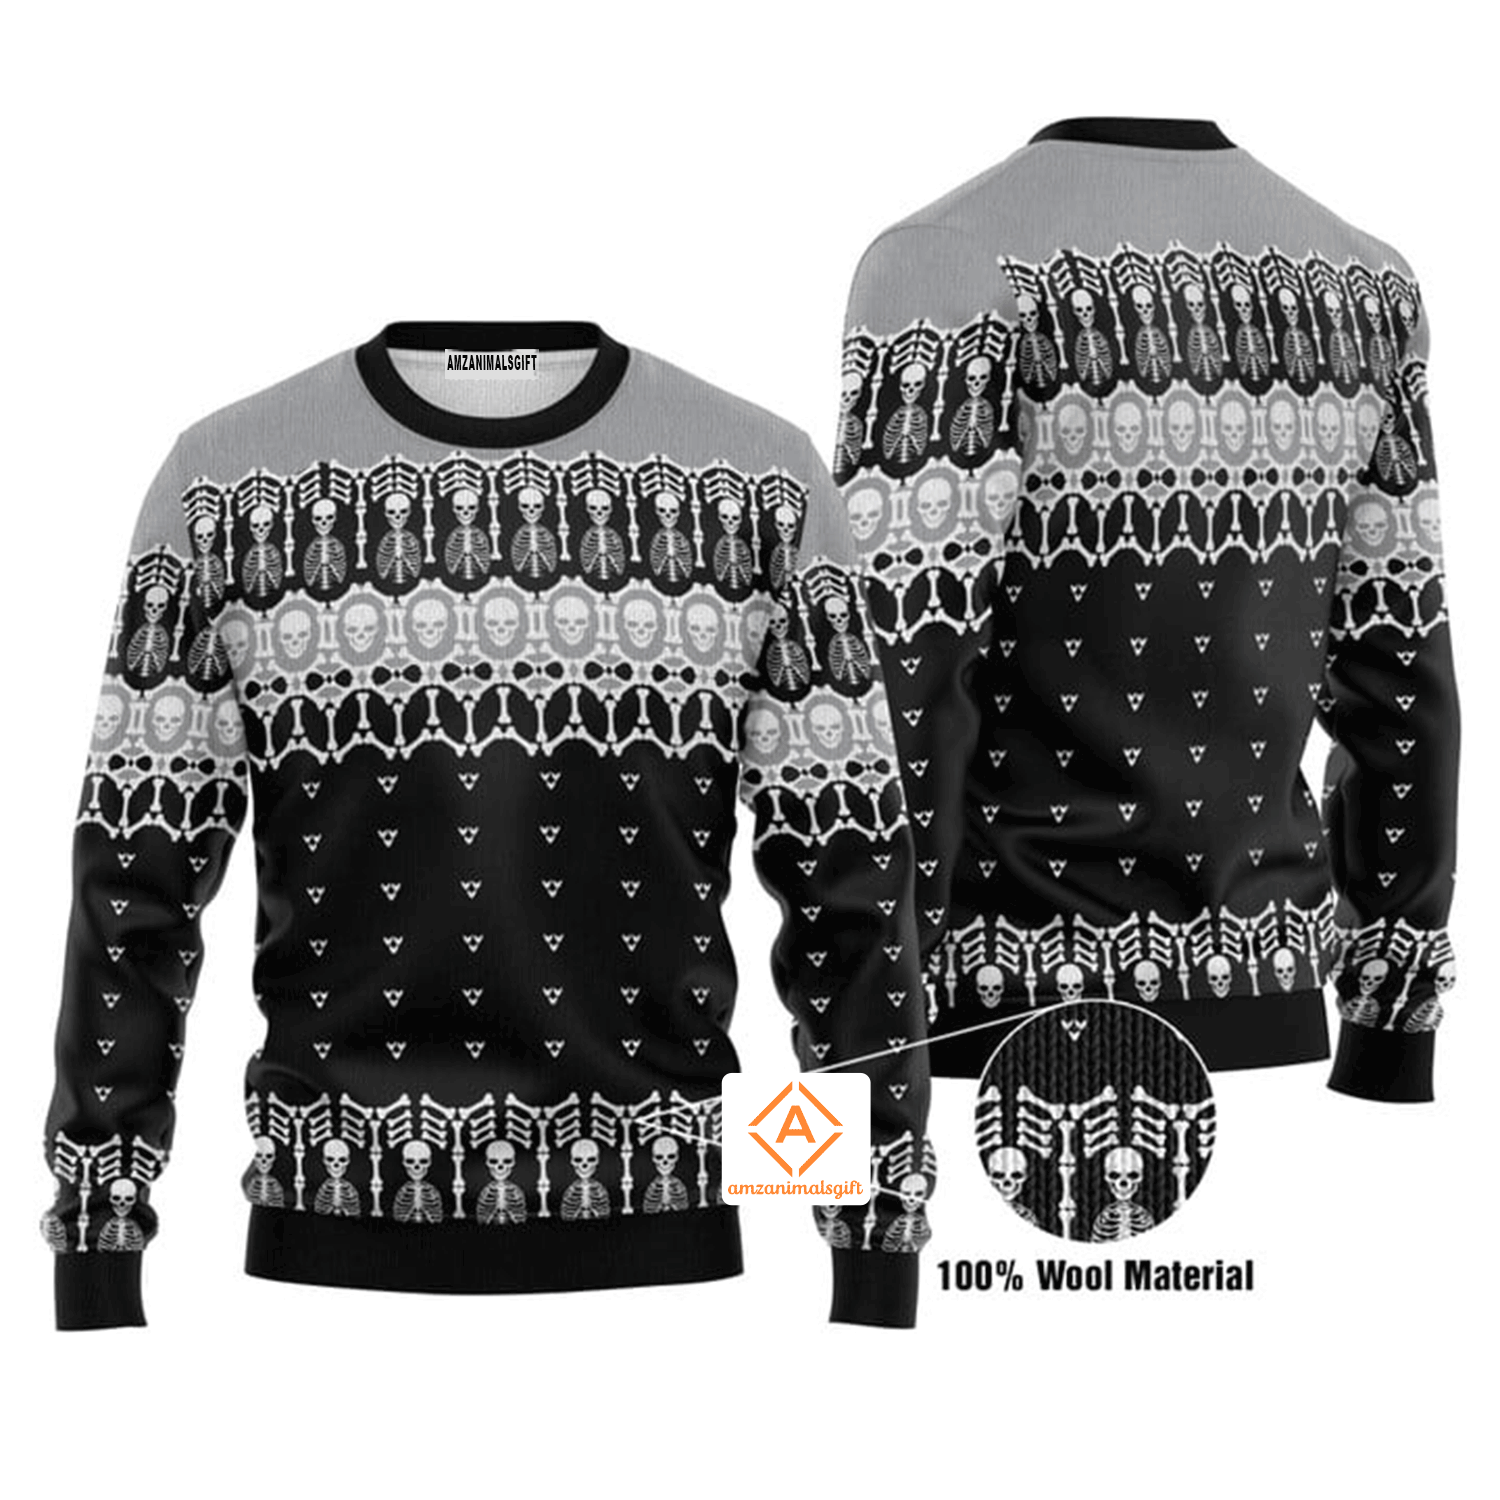 Black And White Skeleton Christmas Sweater, Ugly Sweater For Men & Women, Perfect Outfit For Christmas New Year Autumn Winter